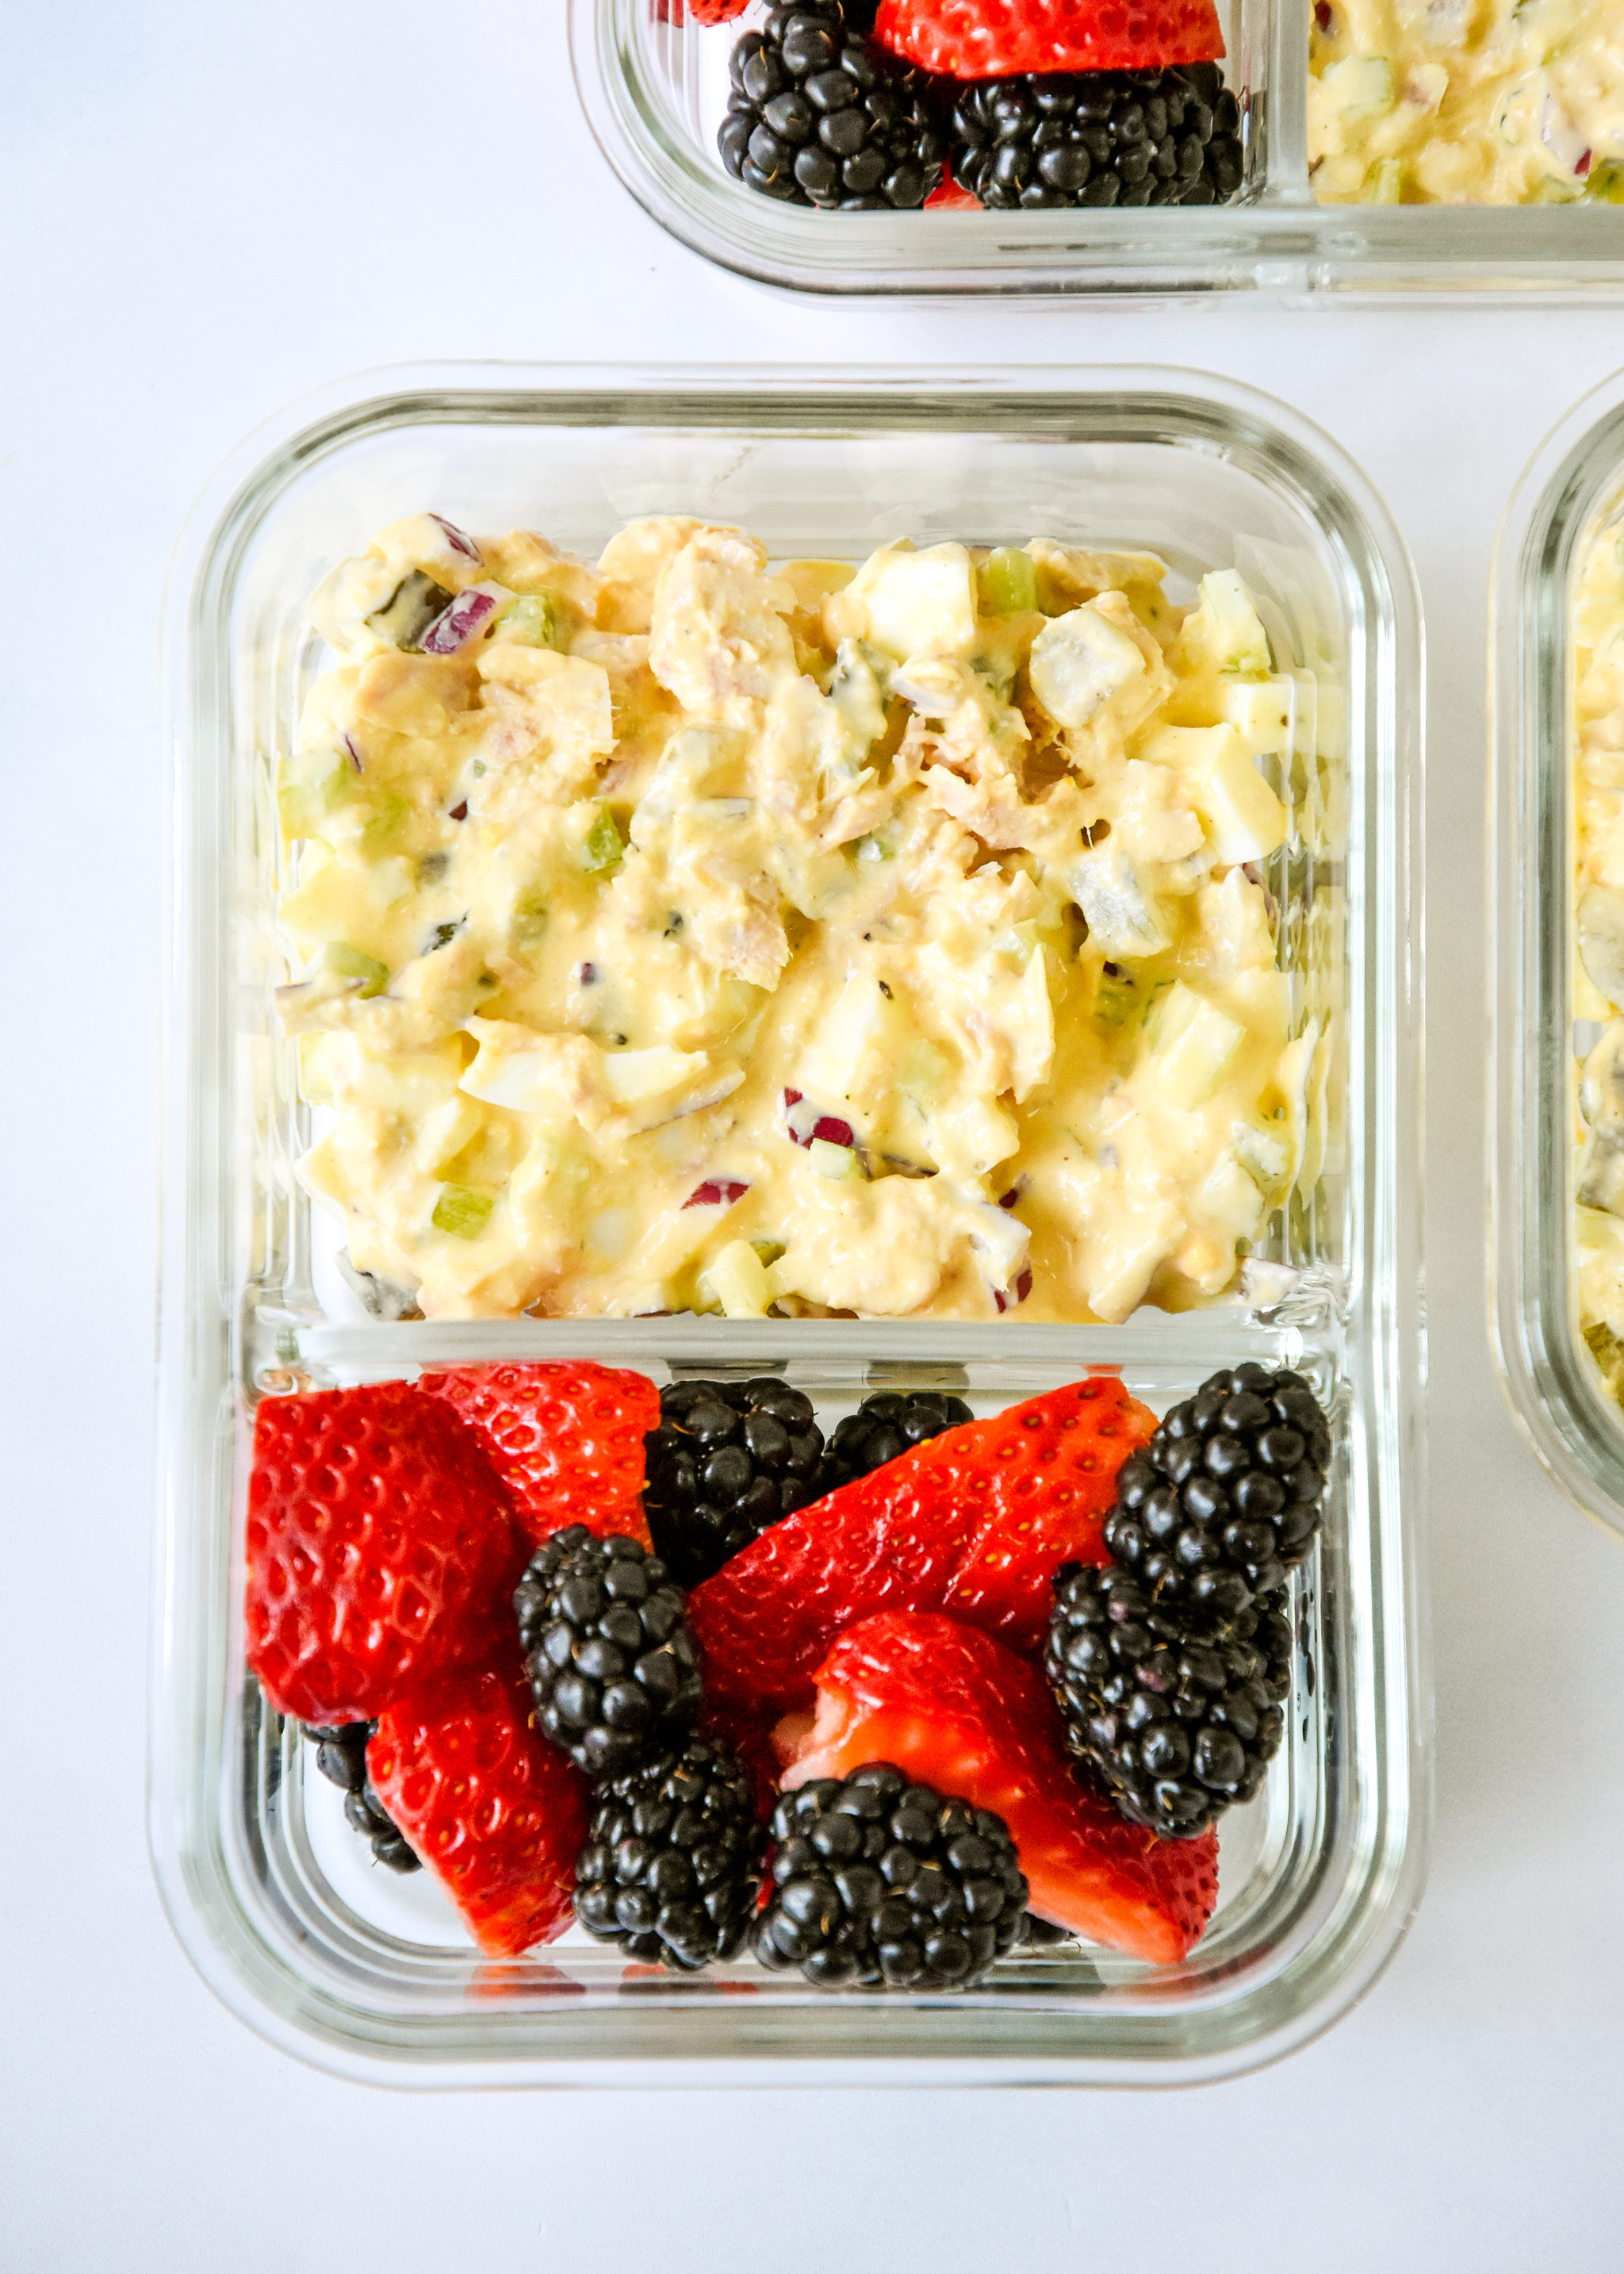 tuna egg salad in a meal prep container with fresh berries.